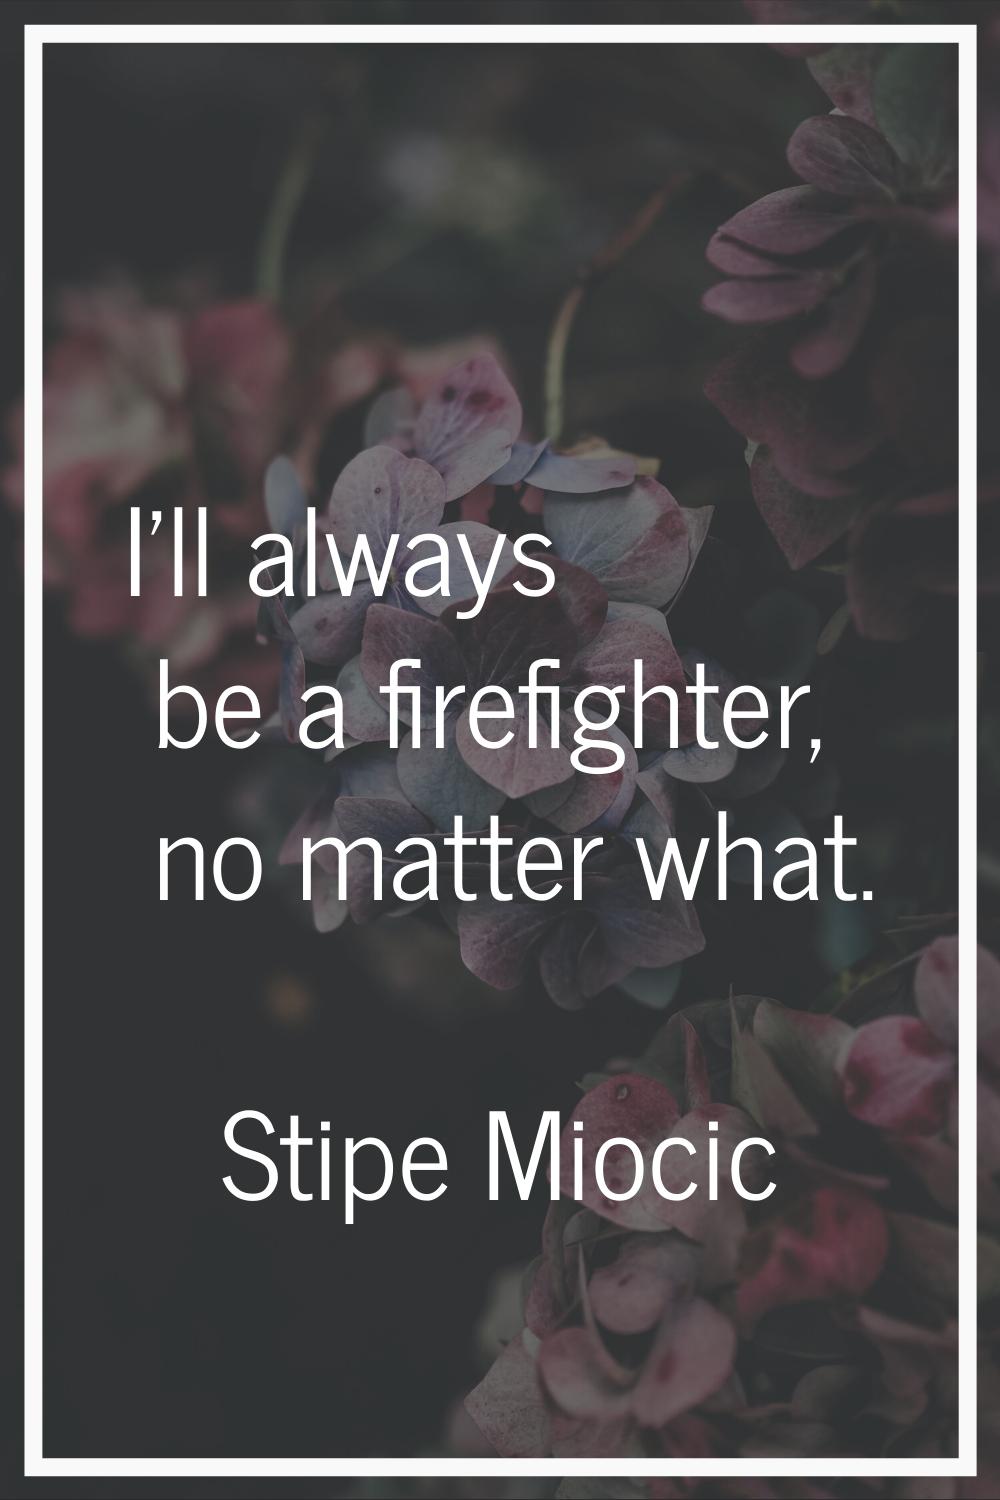 I'll always be a firefighter, no matter what.